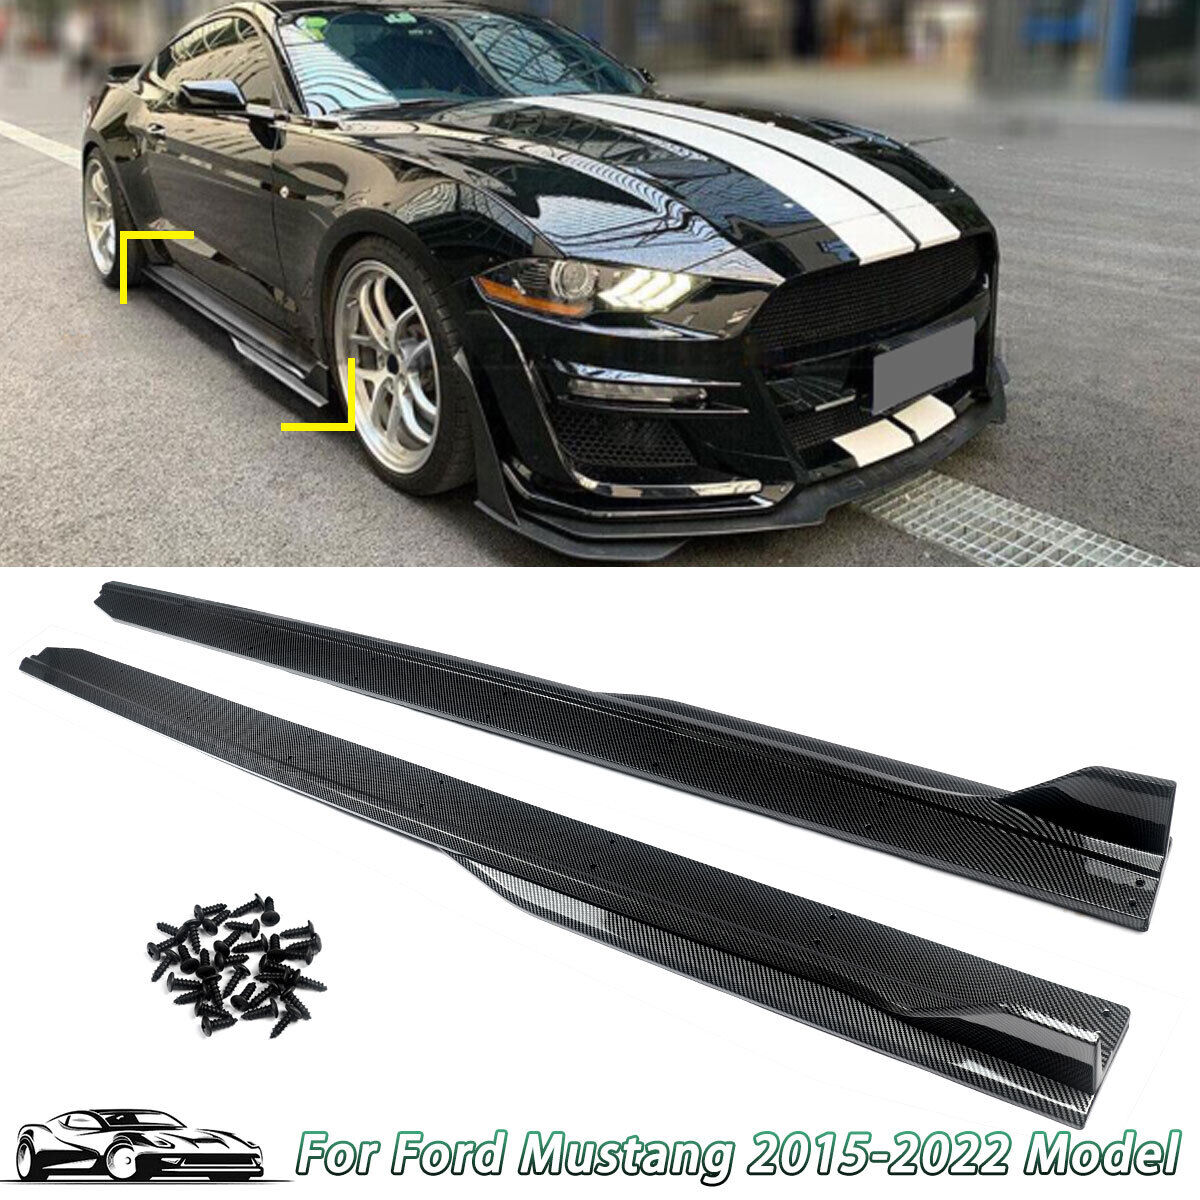 GT500 Style Side Skirt Extension Splitter Lip Fit 15-22 Ford Mustang CARBON LOOK